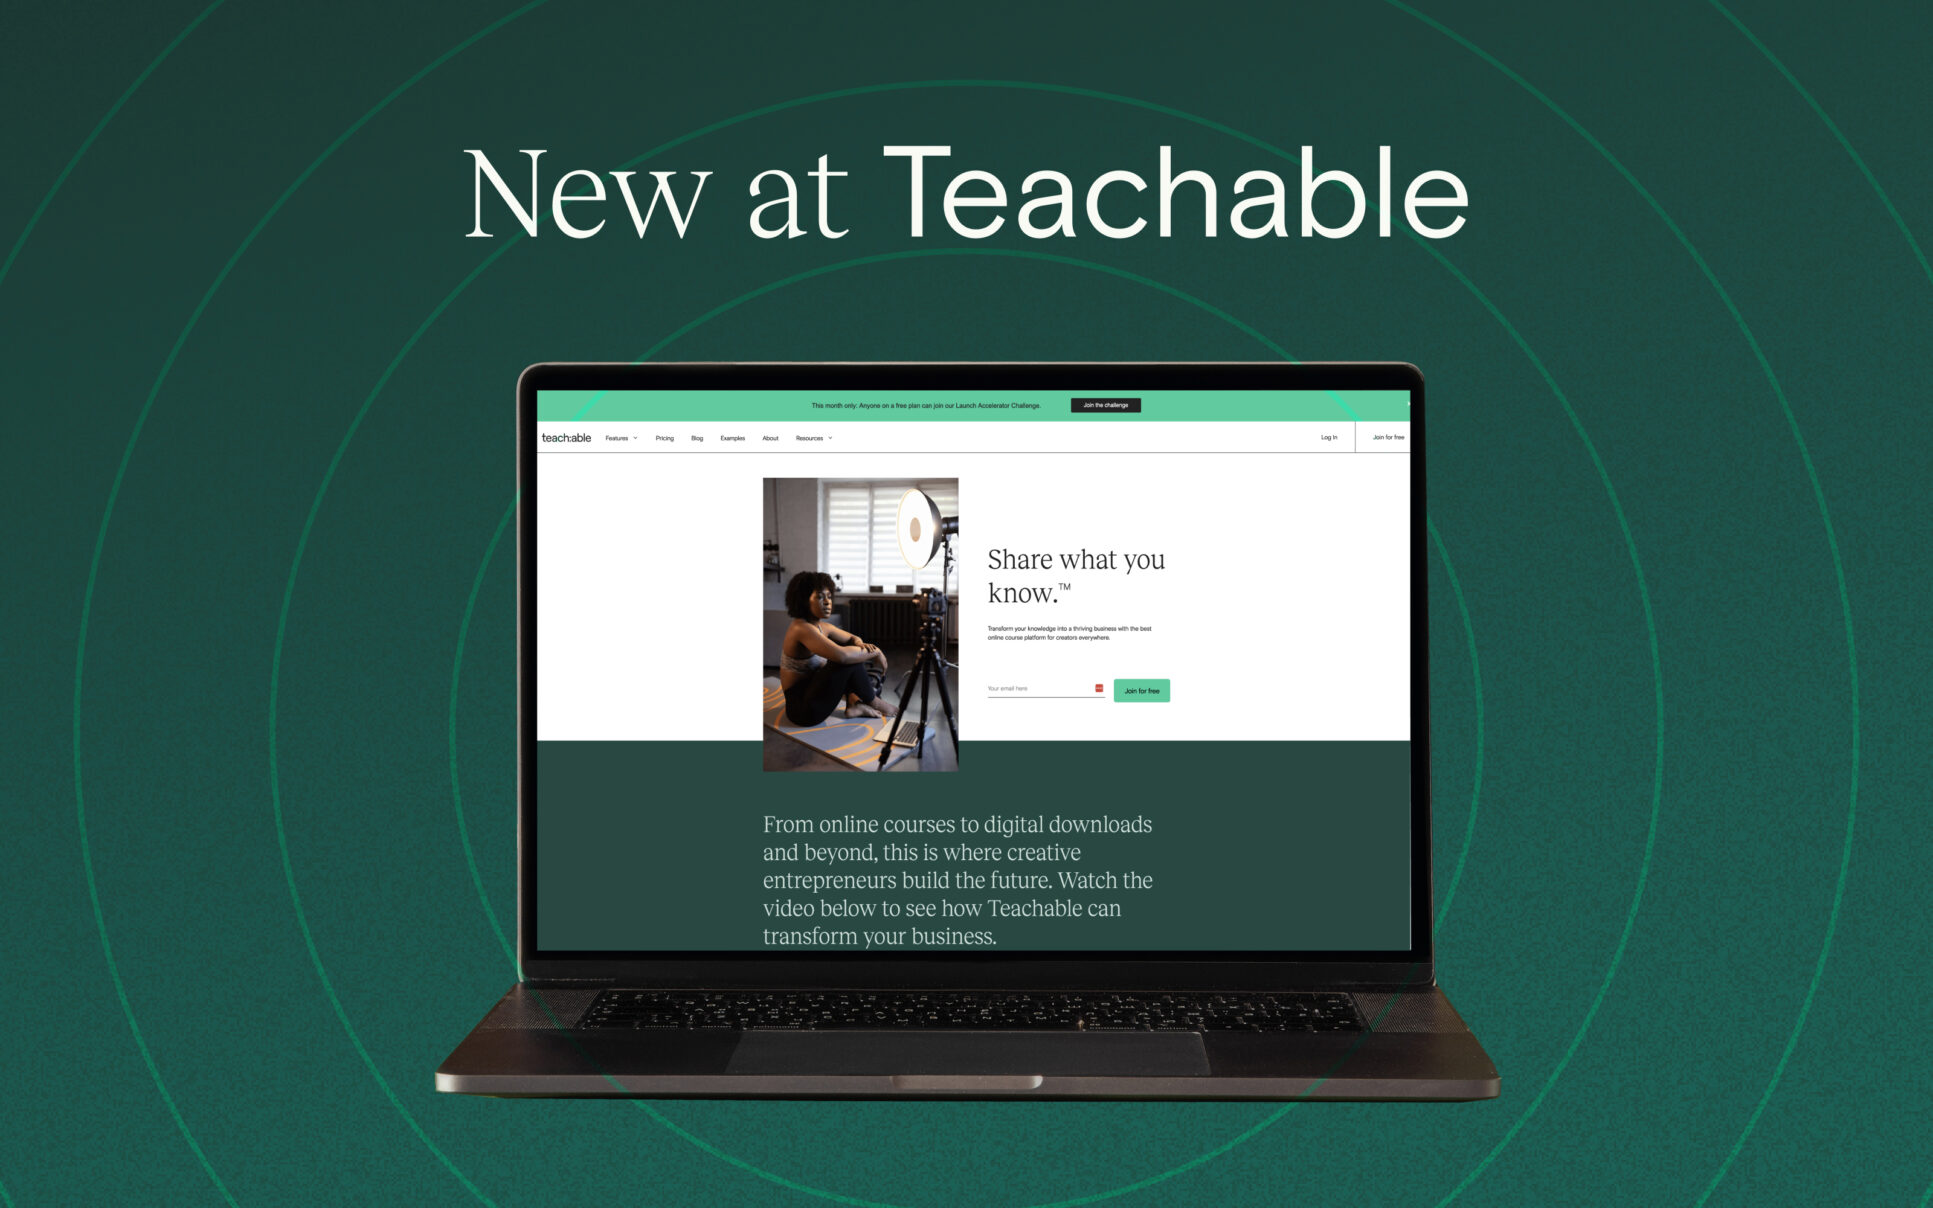 Teachable's new tools, features, and launches—all in one place.